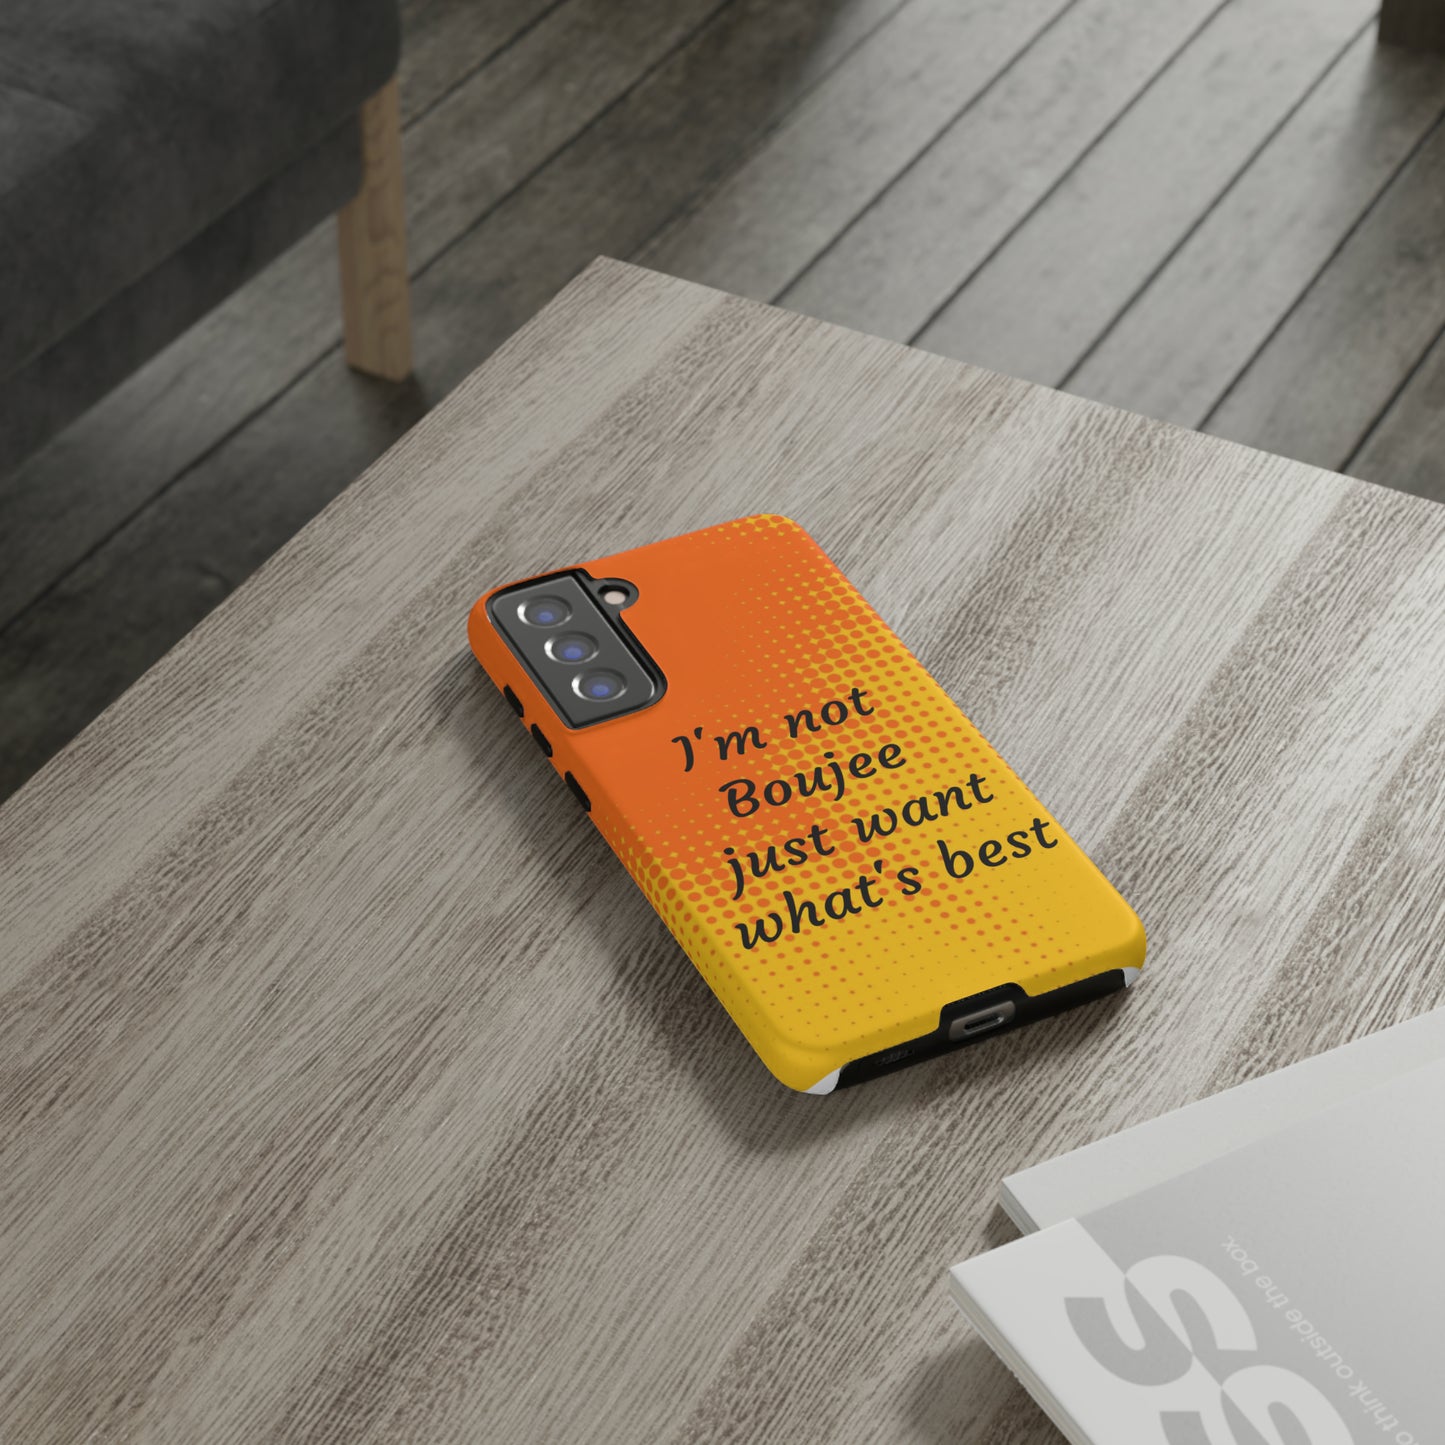 "I'm not boujee just want what's best" Tough Phone Cases